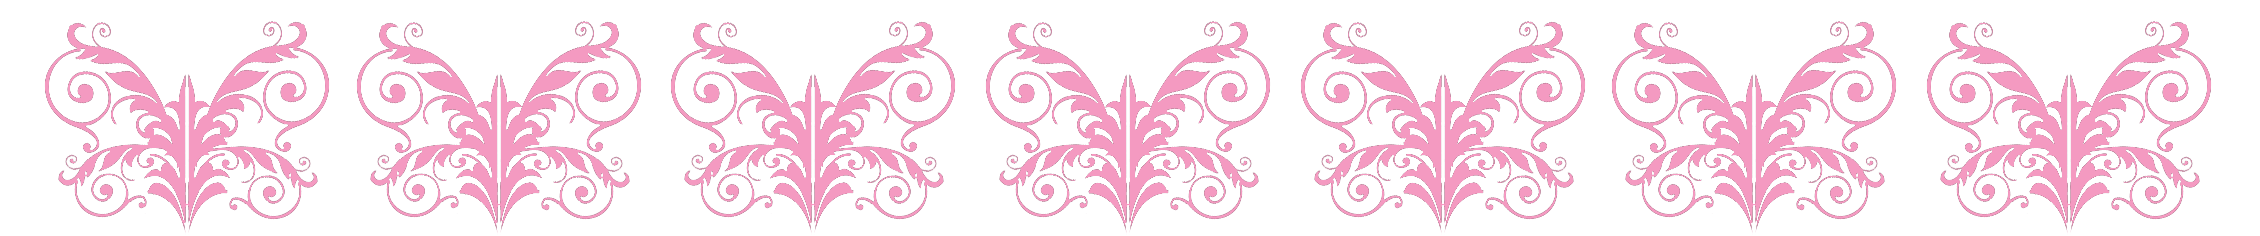 Butterfly Border Clipart